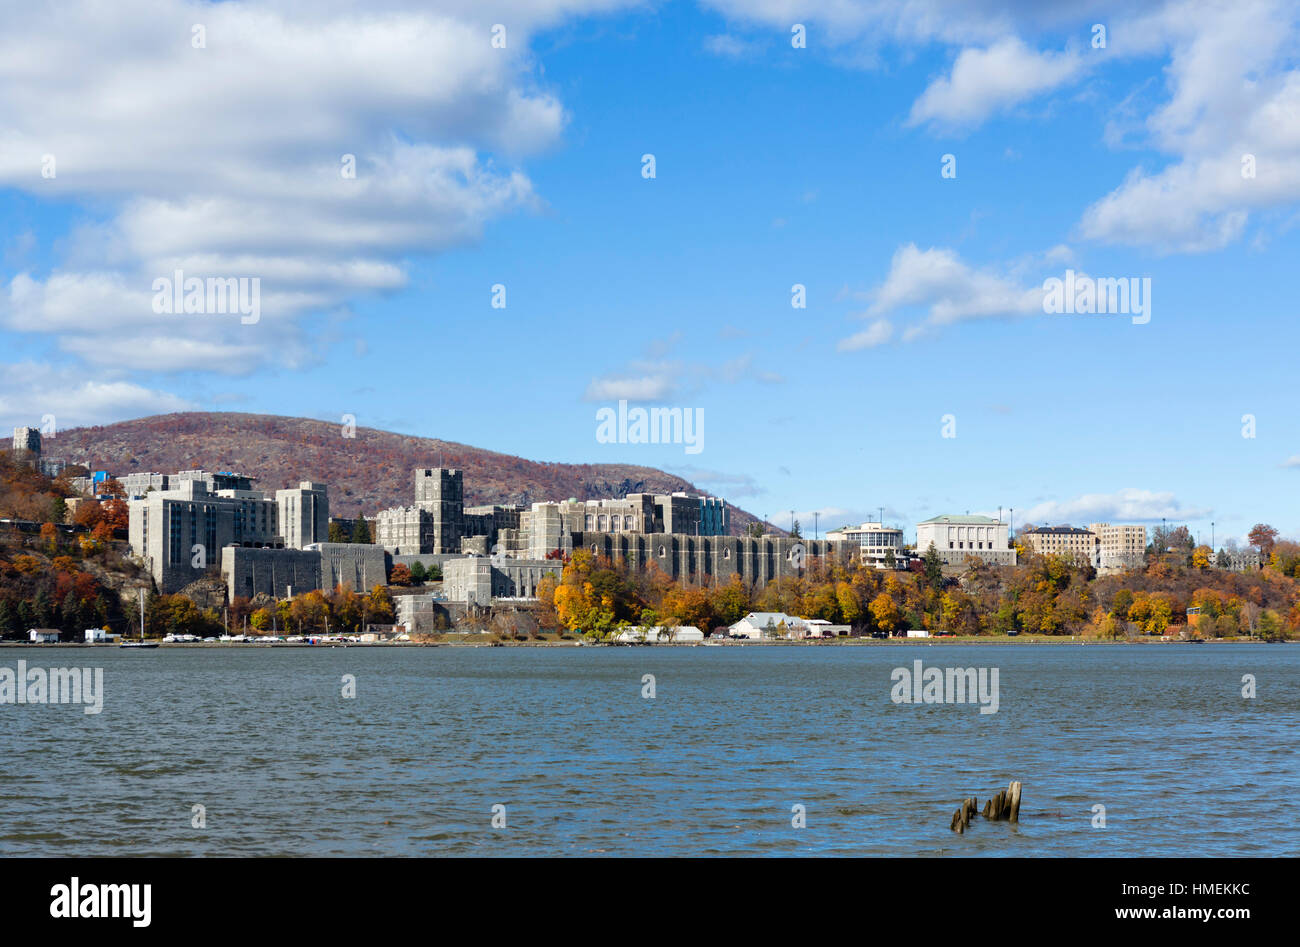 West Point Military Academy on the Hudson River. The United States Military Academy from Garrisons Landing, New York State, USA Stock Photo